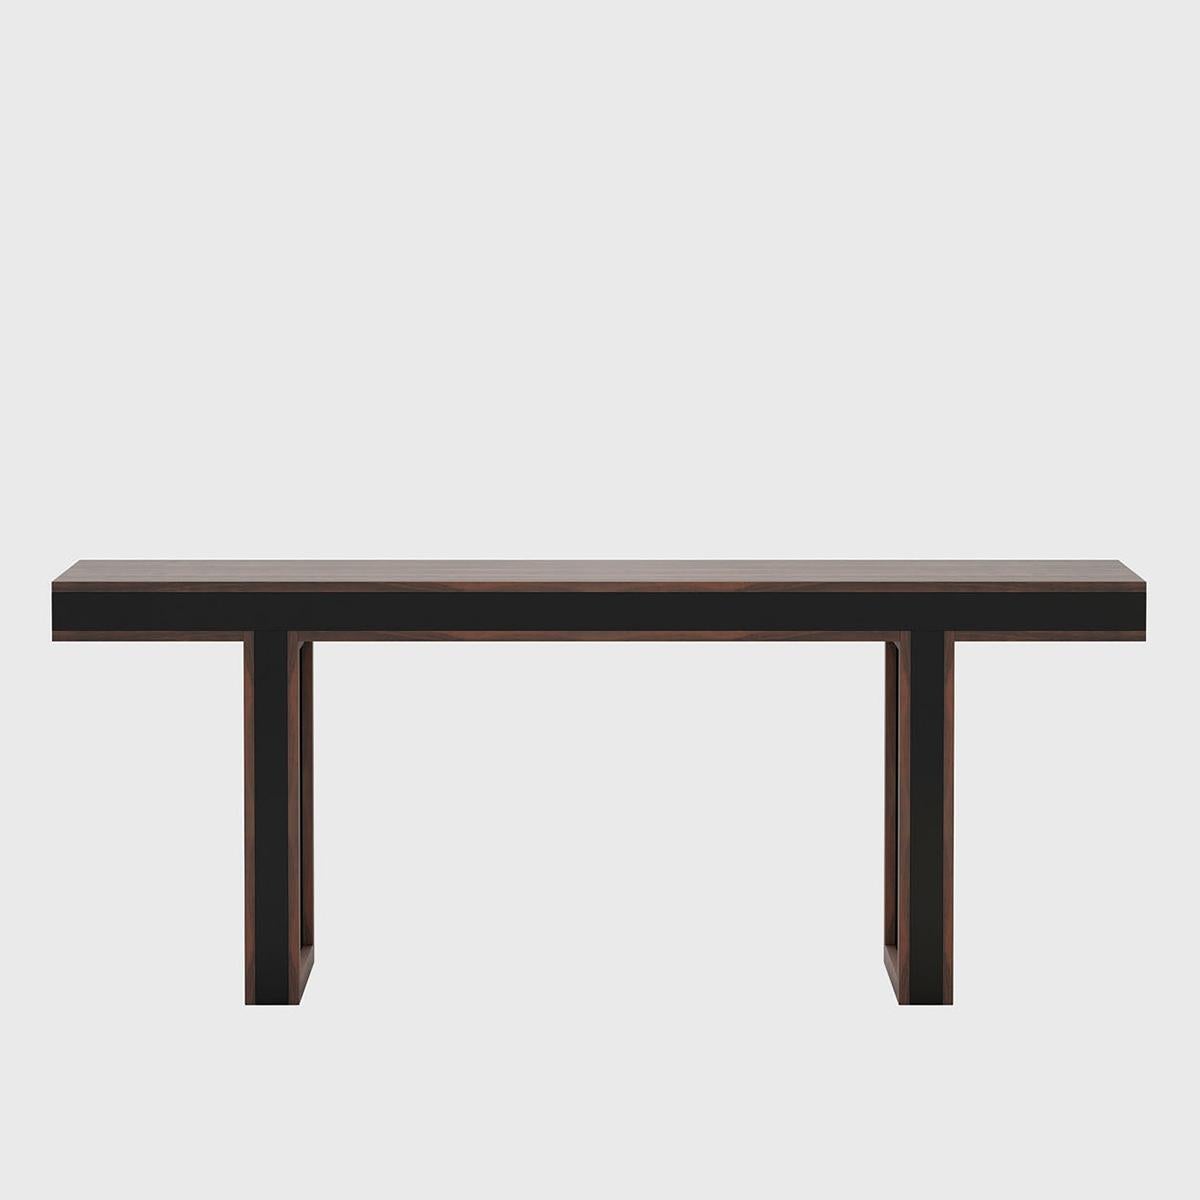 Console table welt with structure and top in eucalyptus wood
in matte smocked finish and in high glossy black lacquered finish.
Also available in other wood finishes on request.